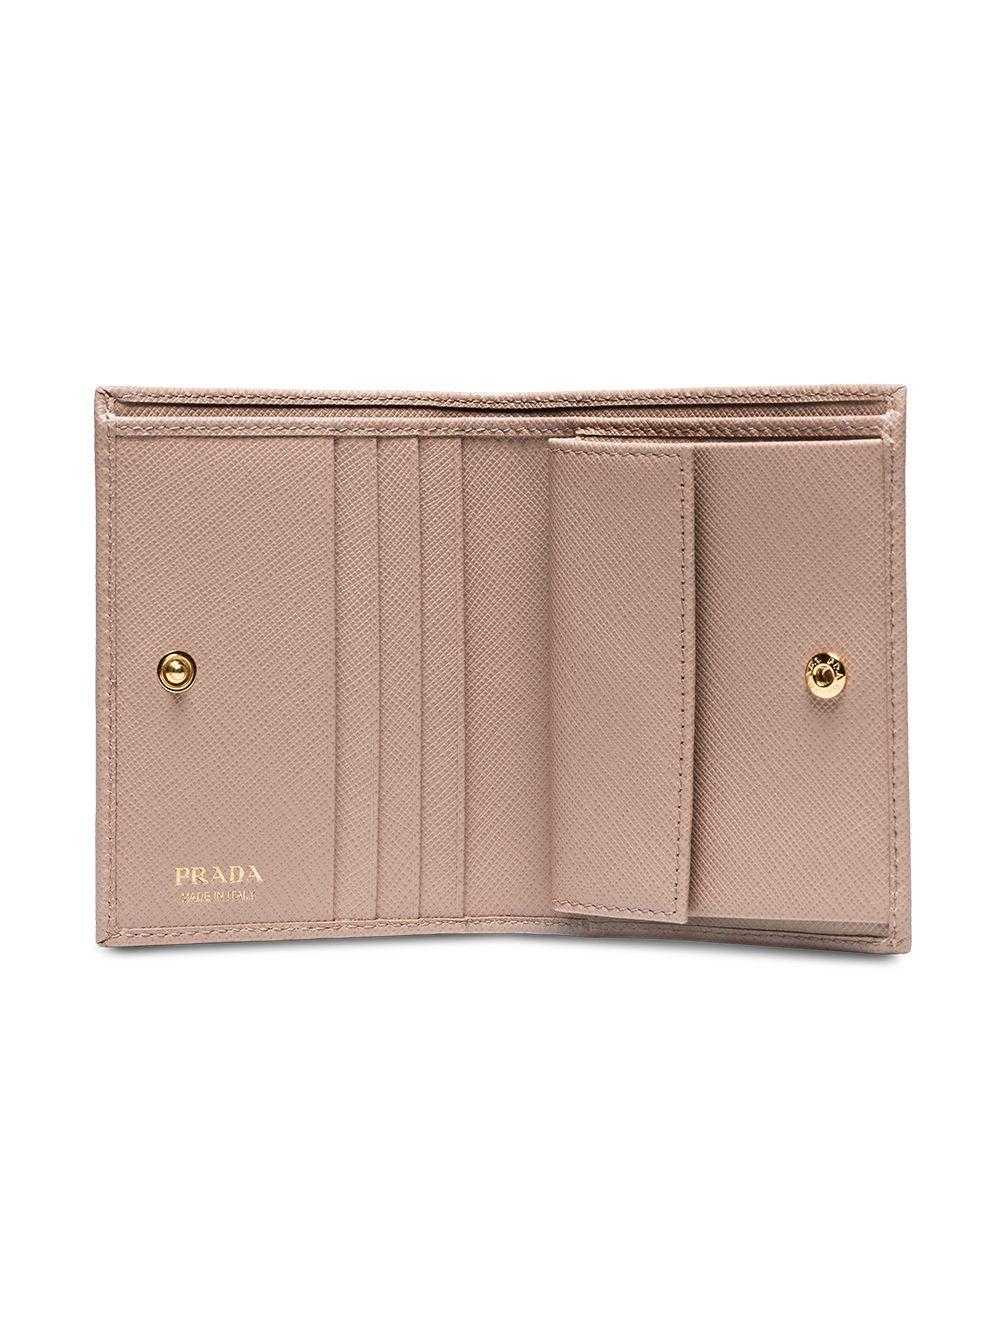 Prada Leather Saffiano Foldover Wallet in Pink - Lyst